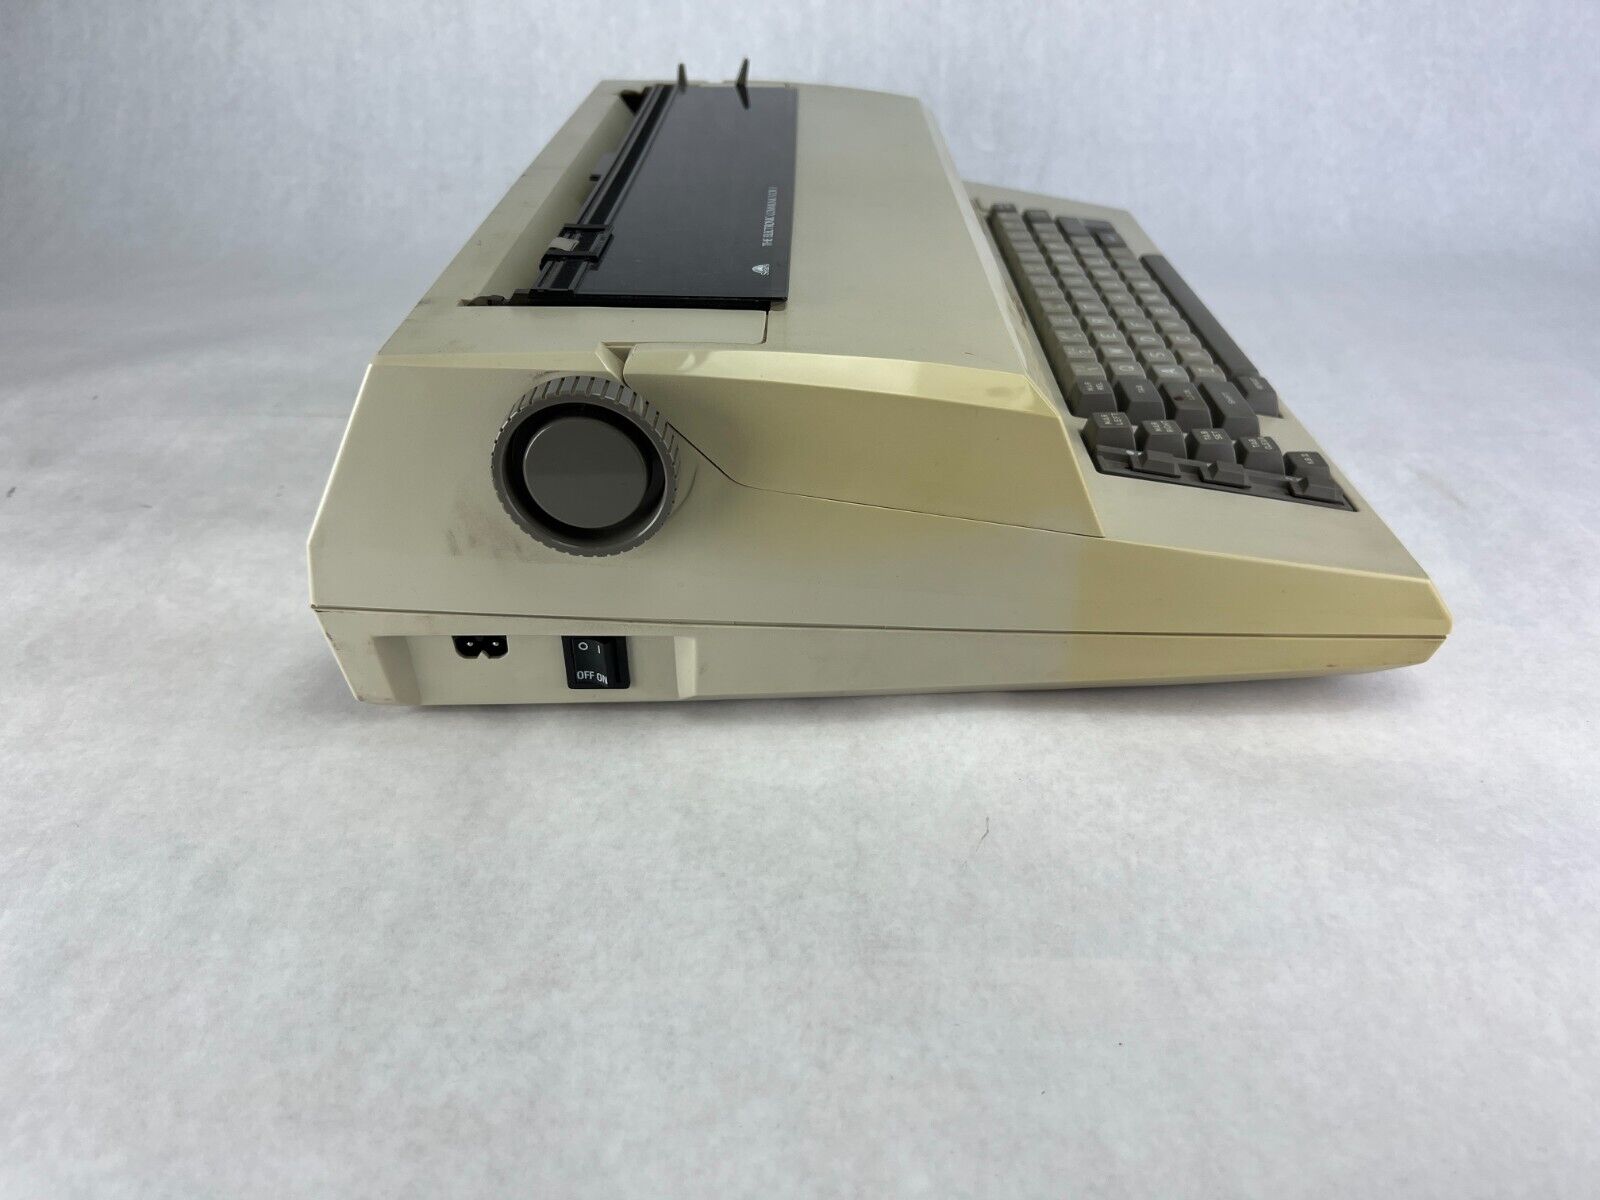 Vintage Sears The Electronic Communicator 1 Typewriter 161.53010 -PSU Included